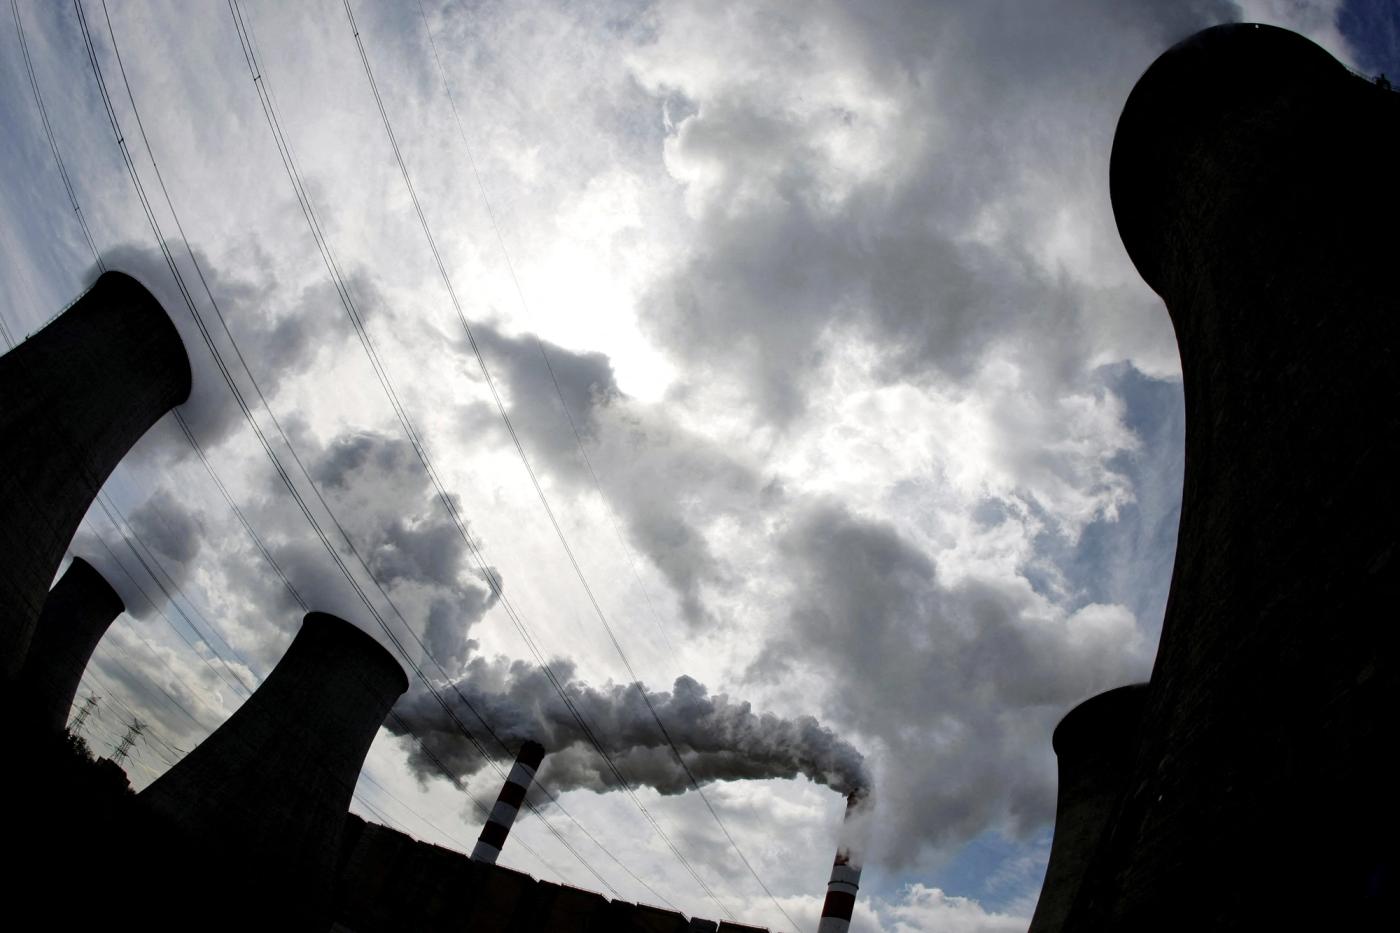 Smoke bellow from the chimneys of Poland's Belchatow Power Station, Europe's largest biggest coal-fired power plant, in this May 7, 2009. REUTERS/Peter Andrews/File Photo